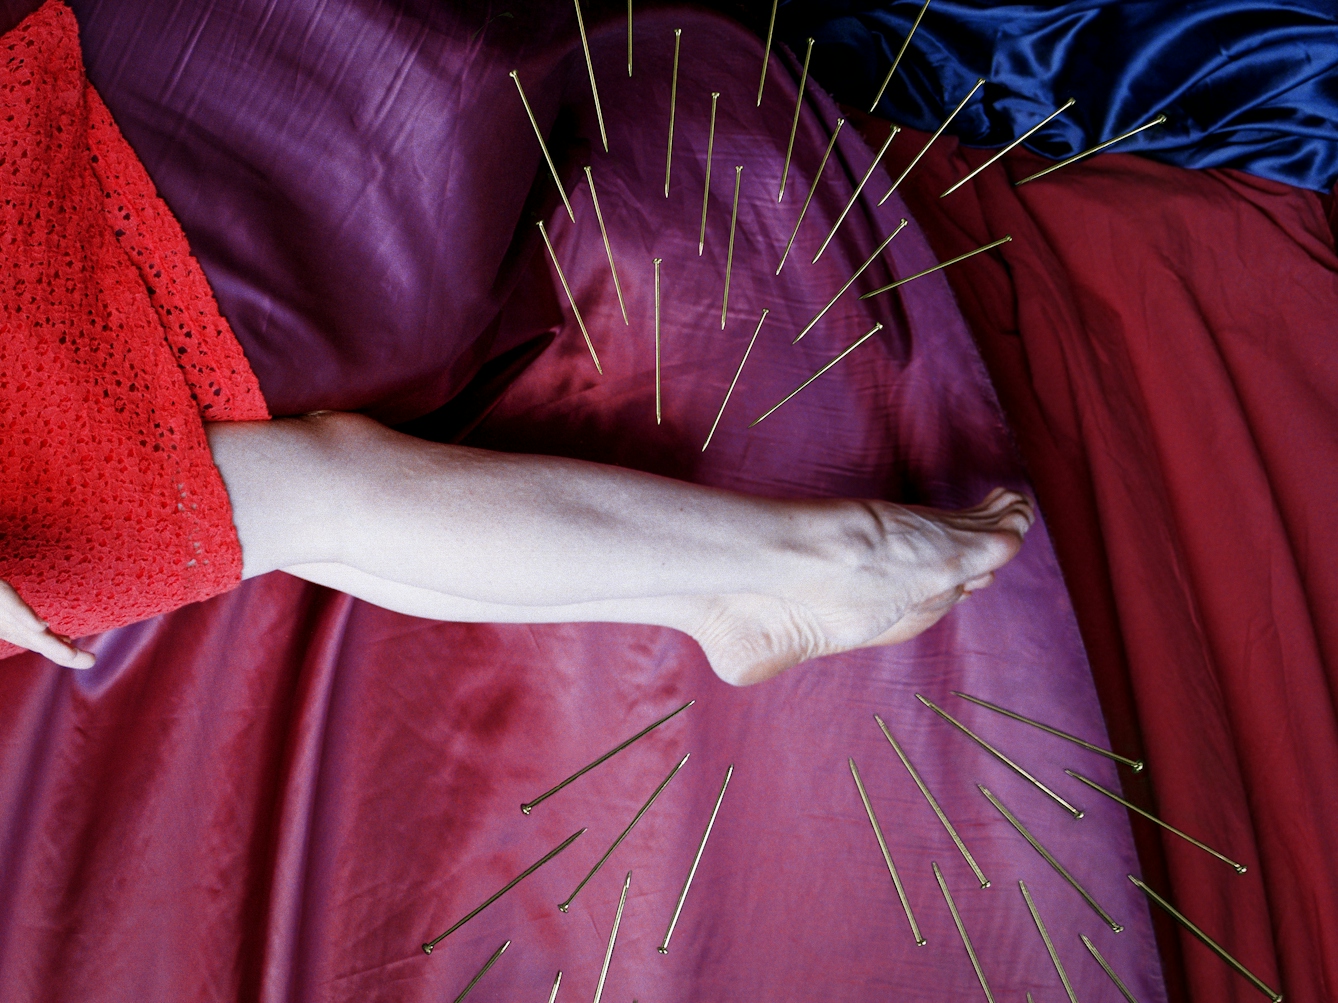 Detail from a larger artwork created with a colour photographic print of a female figure in a bright red dress, set against a purple and blue draped silk background. She is lying horizontal in the frame. Her body is surrounded by groups of dress pins, laid on top of the photographic print. One group attacks her feet and ankles from above and below.